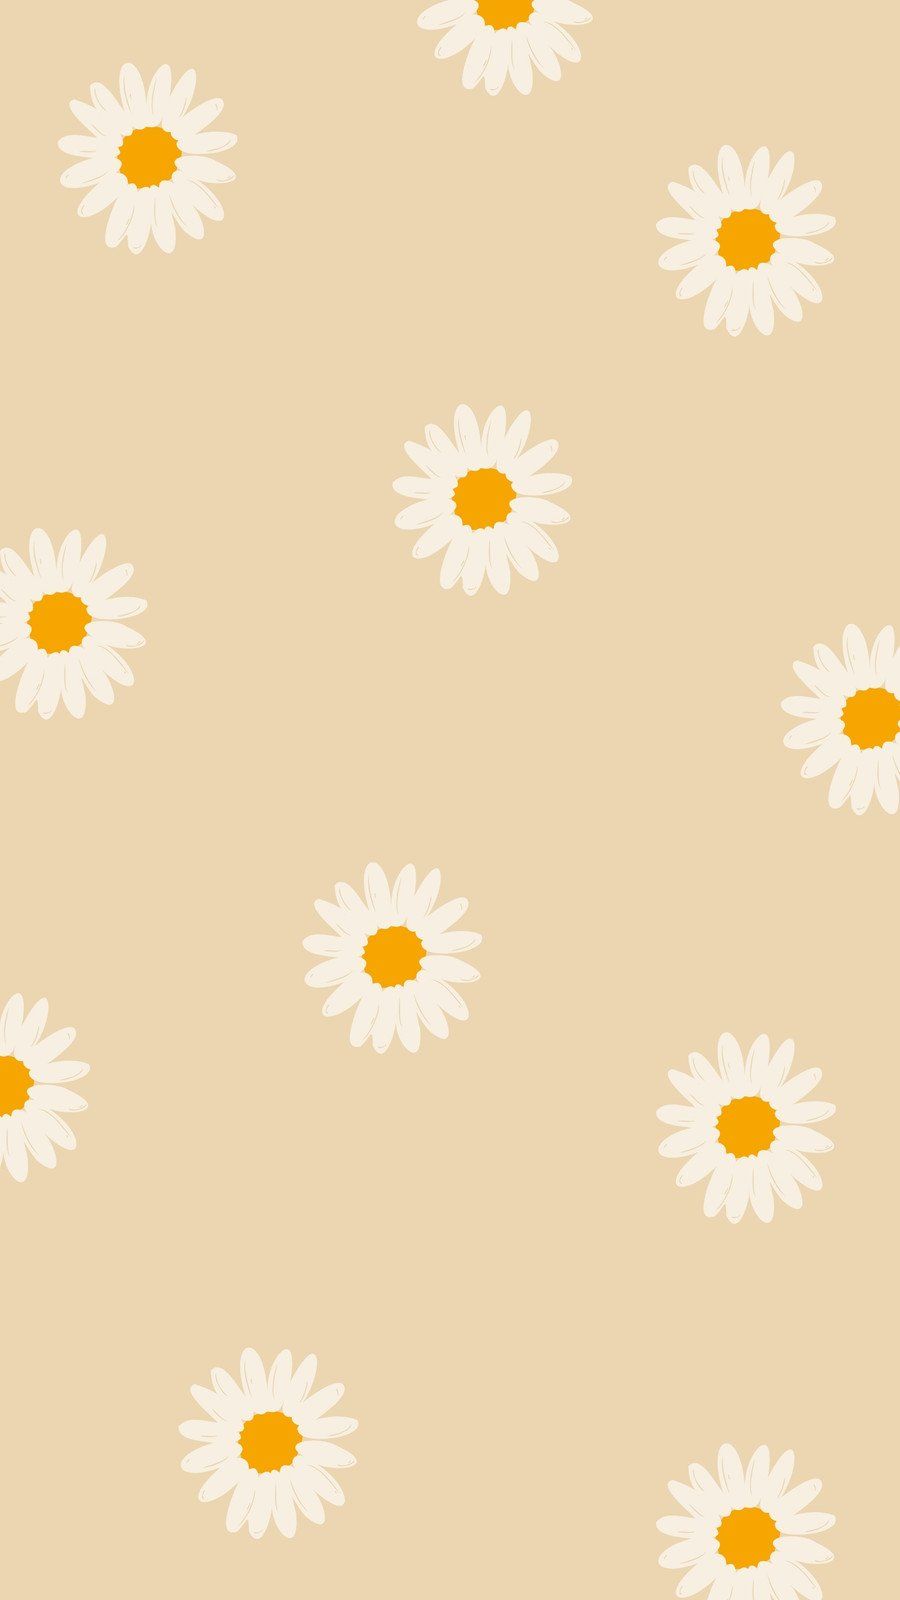 A wallpaper with white and yellow flowers - Daisy